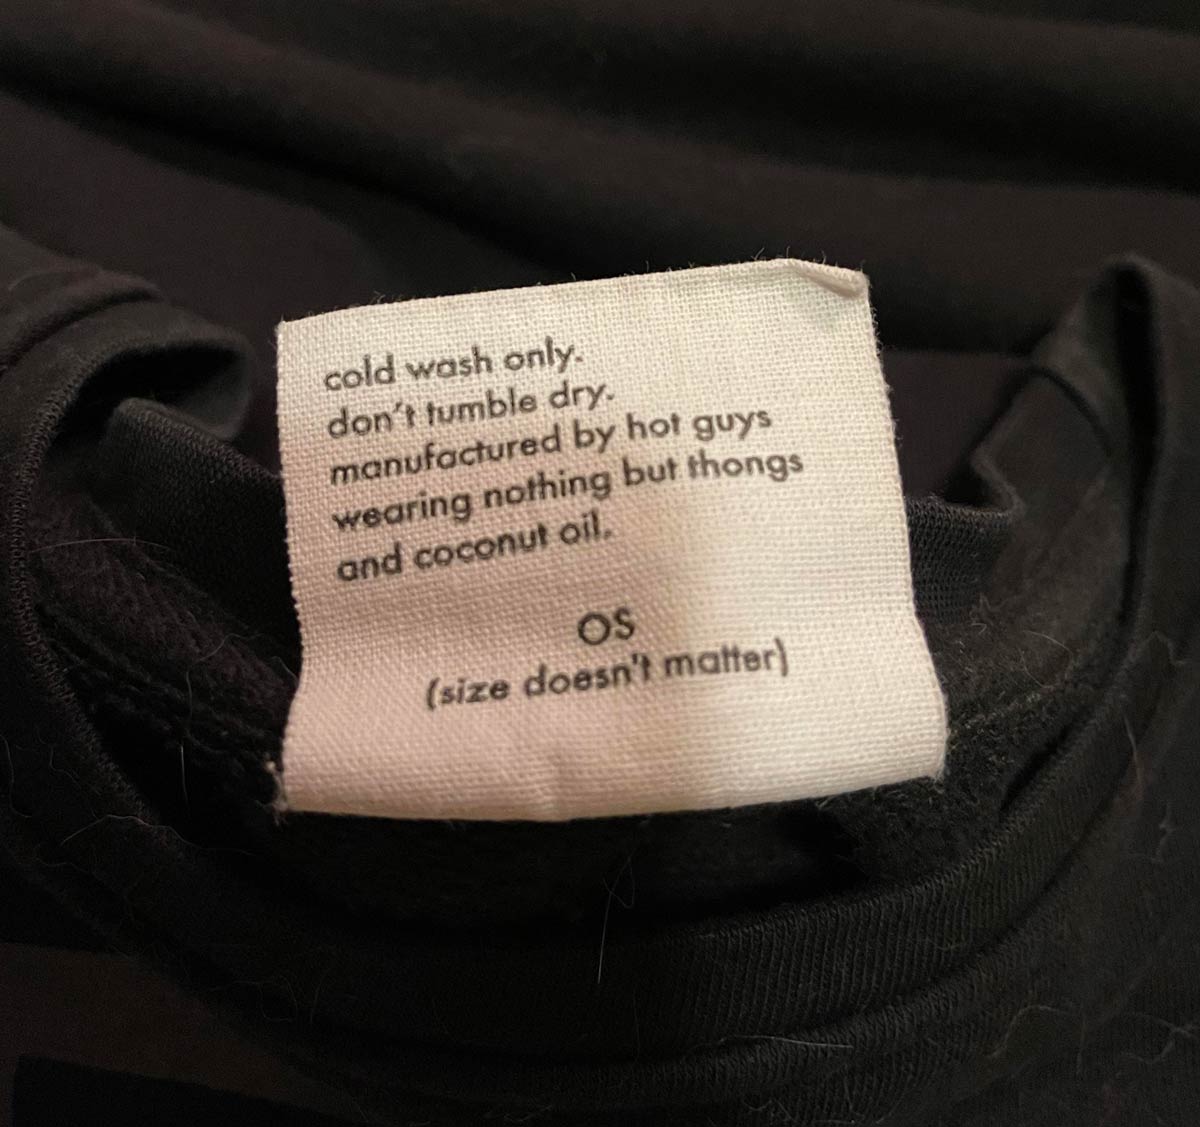 The tag on my shirt